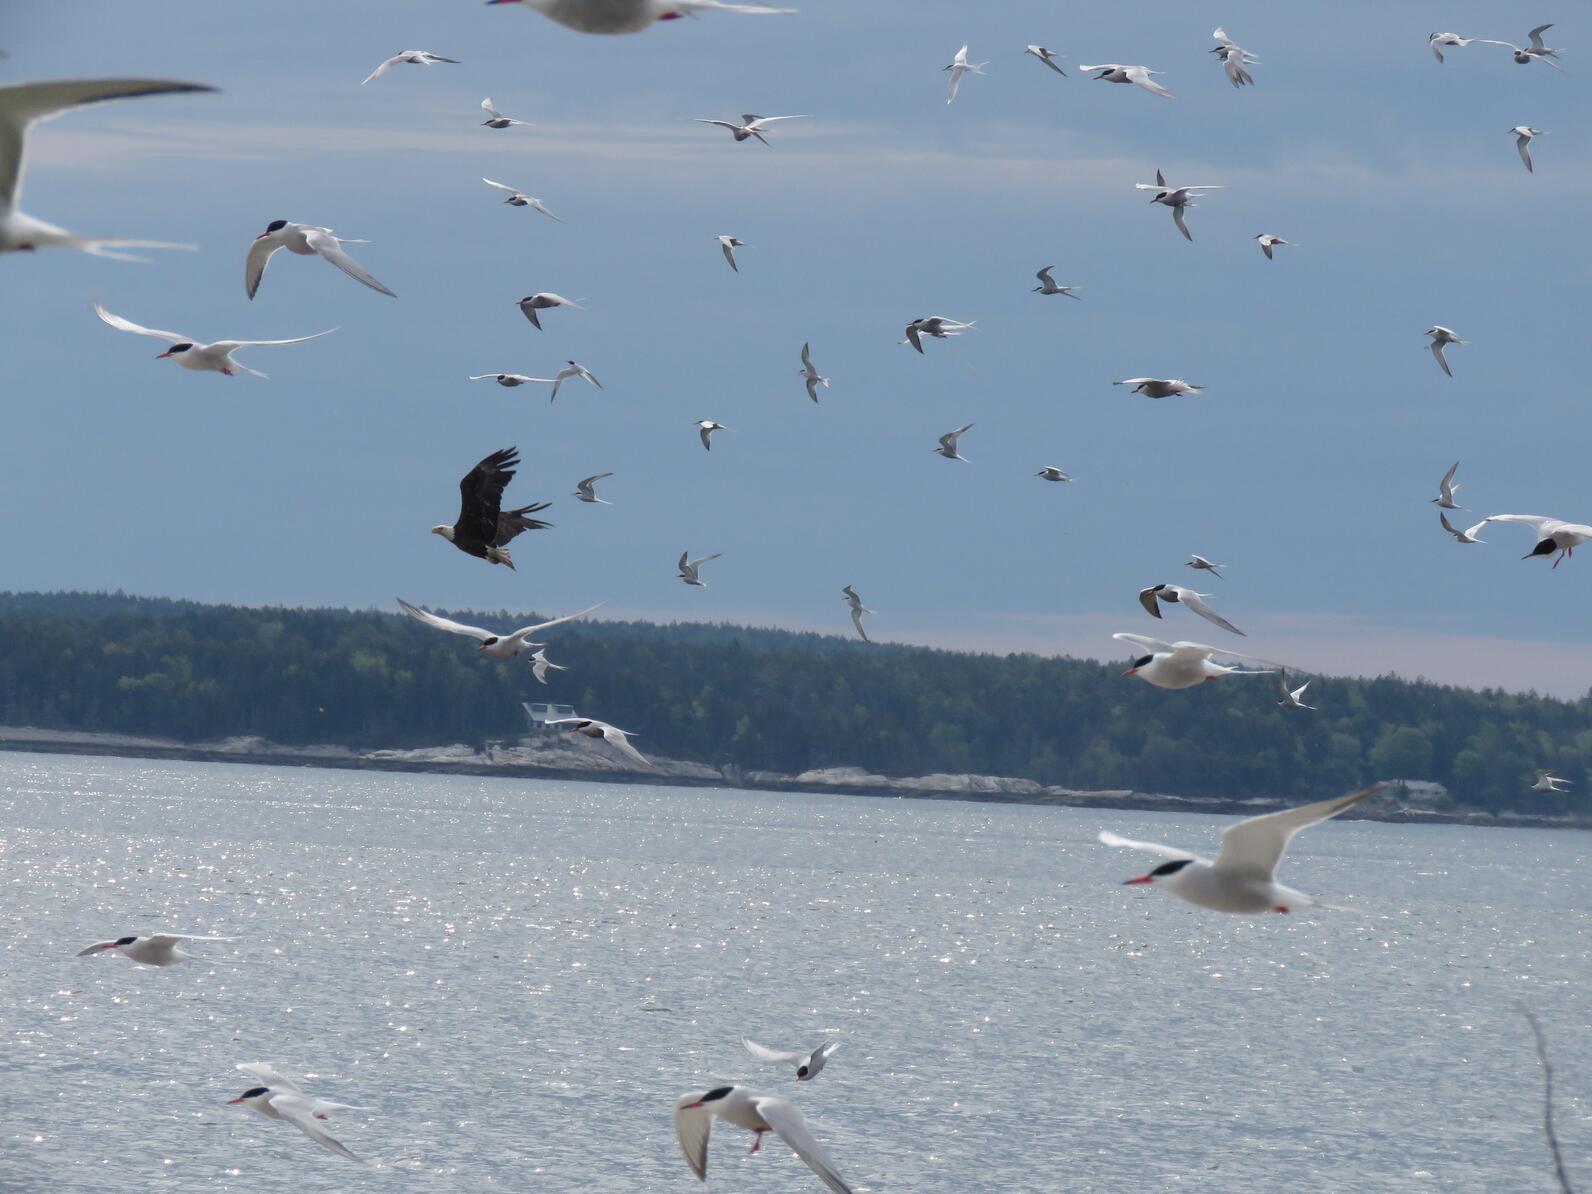 Bald Eagle flies over Jenny Island, chased by terns